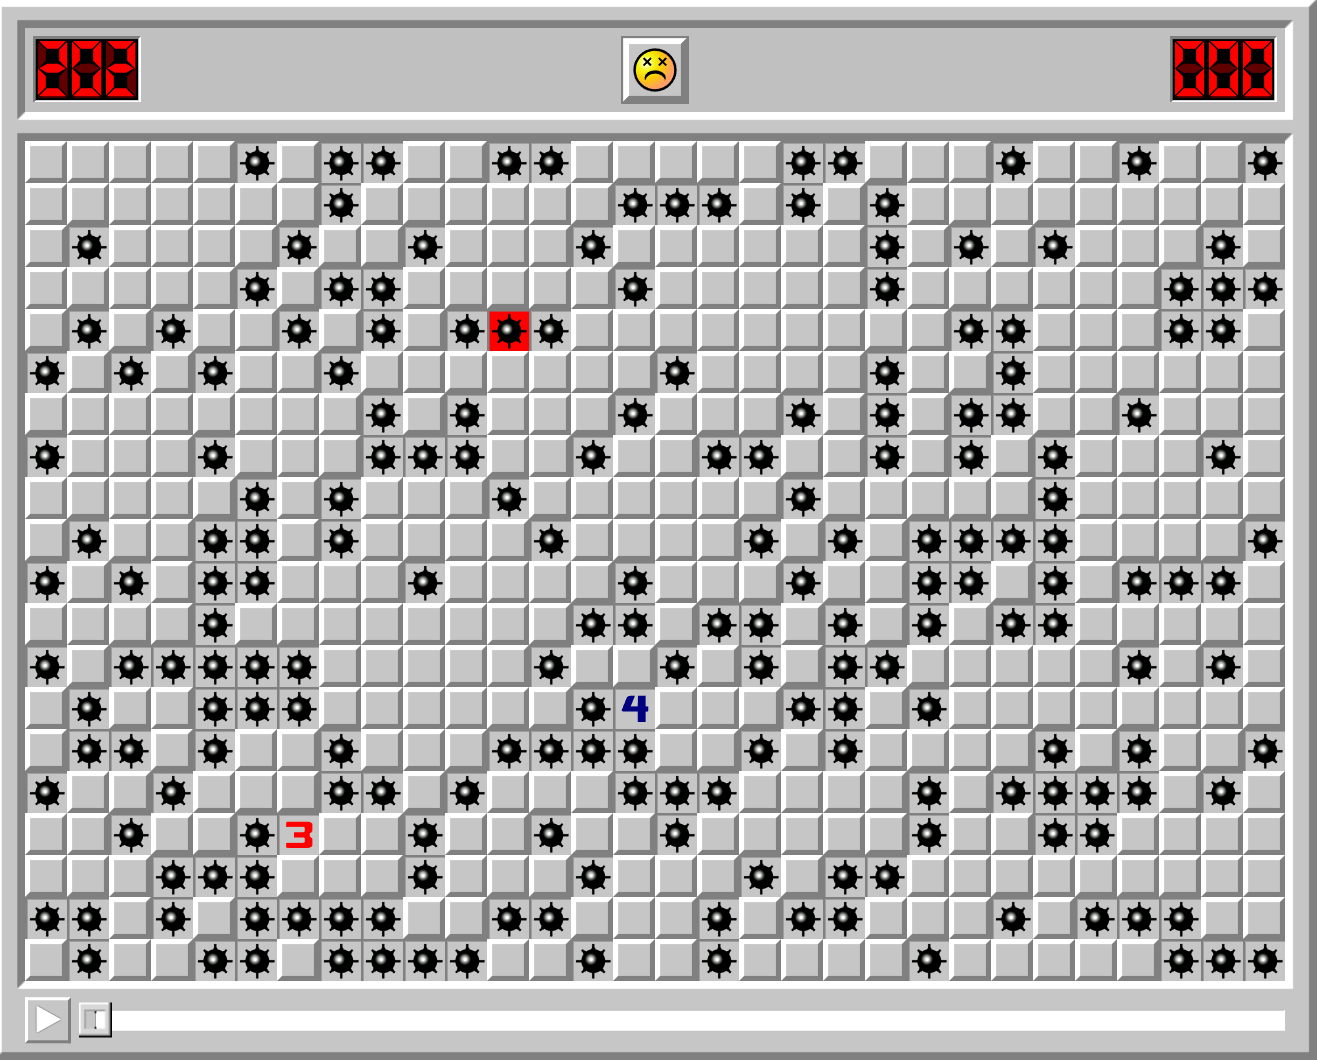 Game over screenshot of Minesweeper game with many mines on the screen